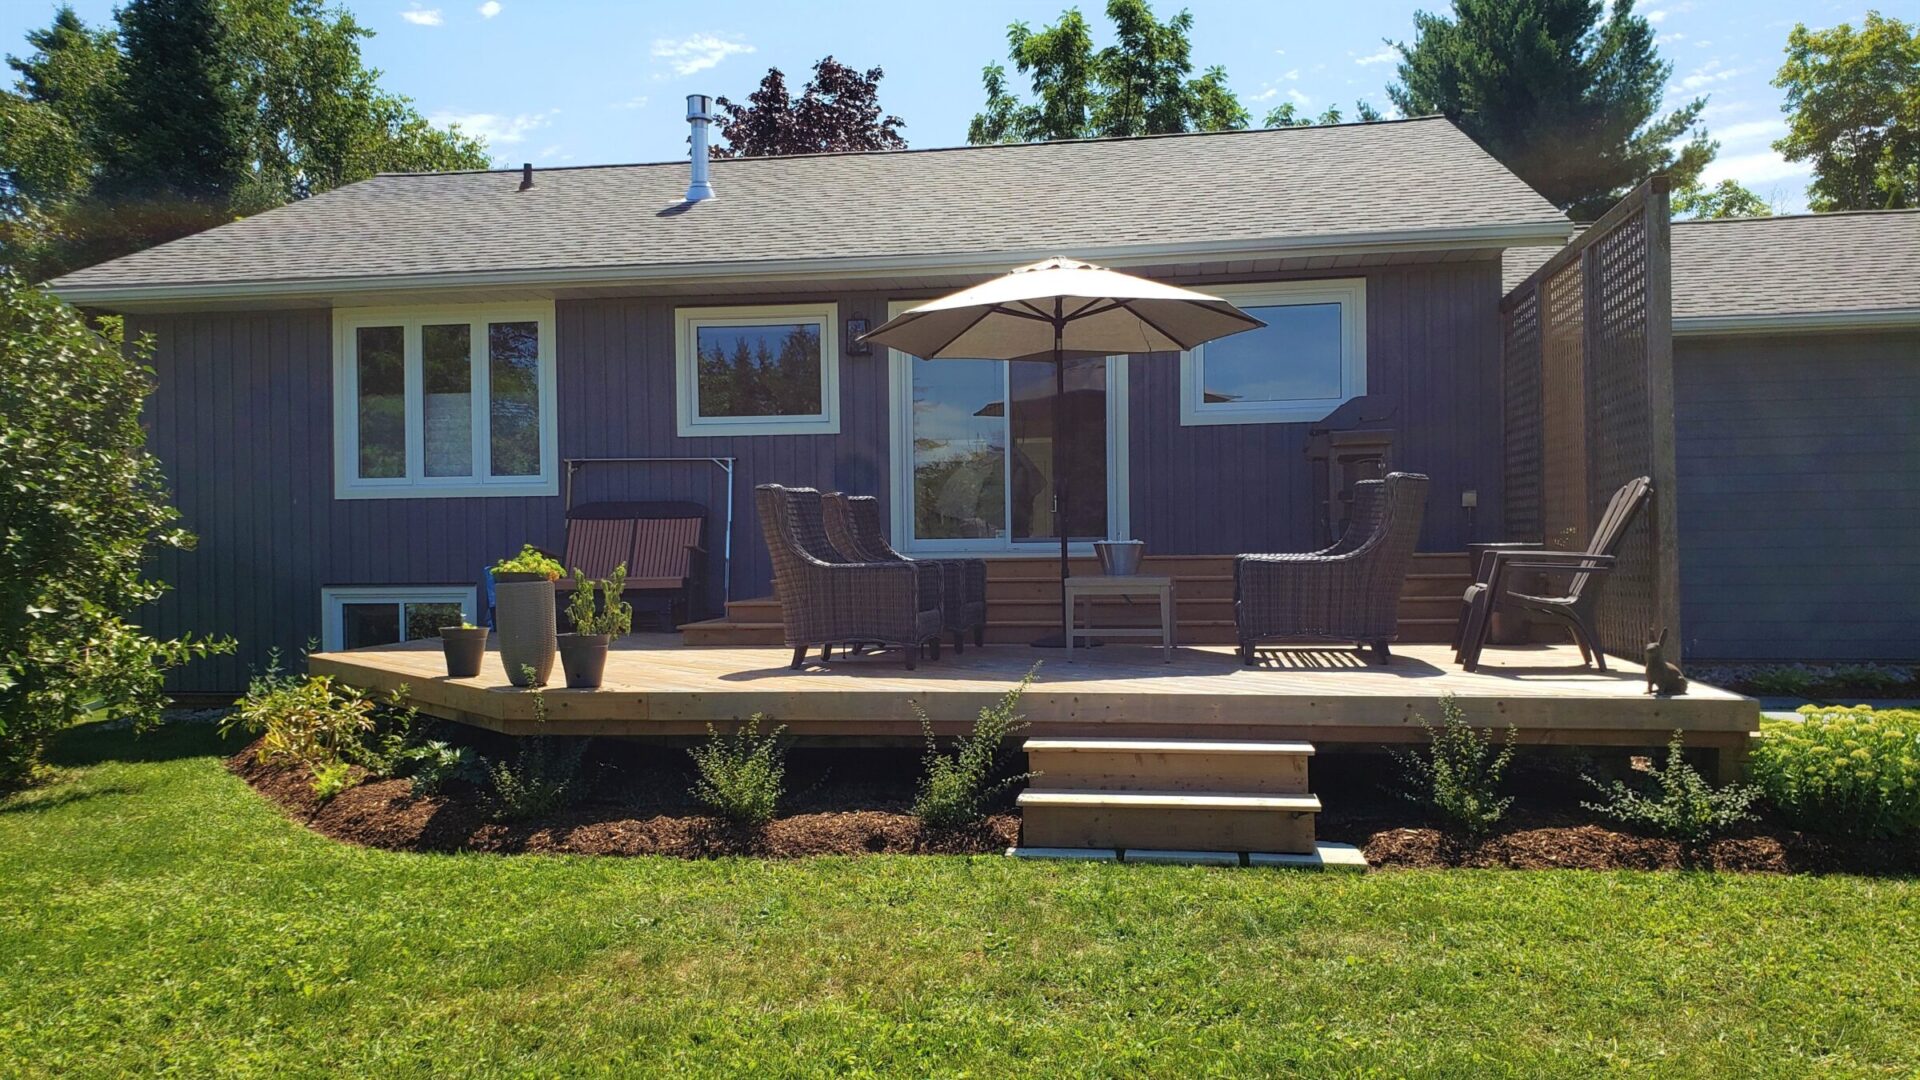 A backyard with a wooden deck featuring wicker furniture and an umbrella, adjacent to a dark gray house with white windows on a sunny day.